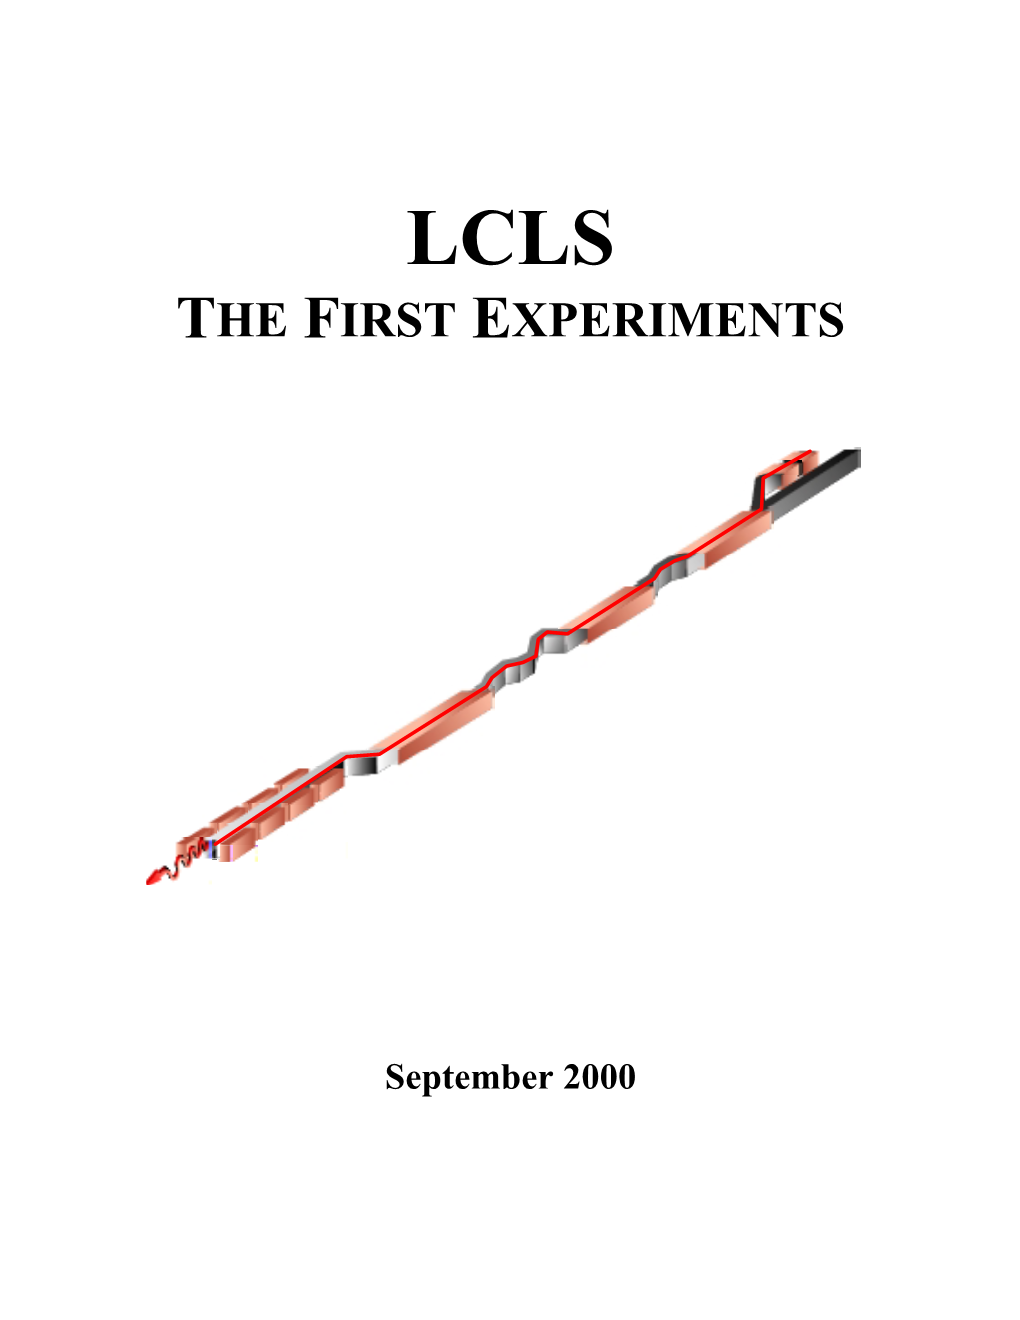 LCLS: the First Experiments